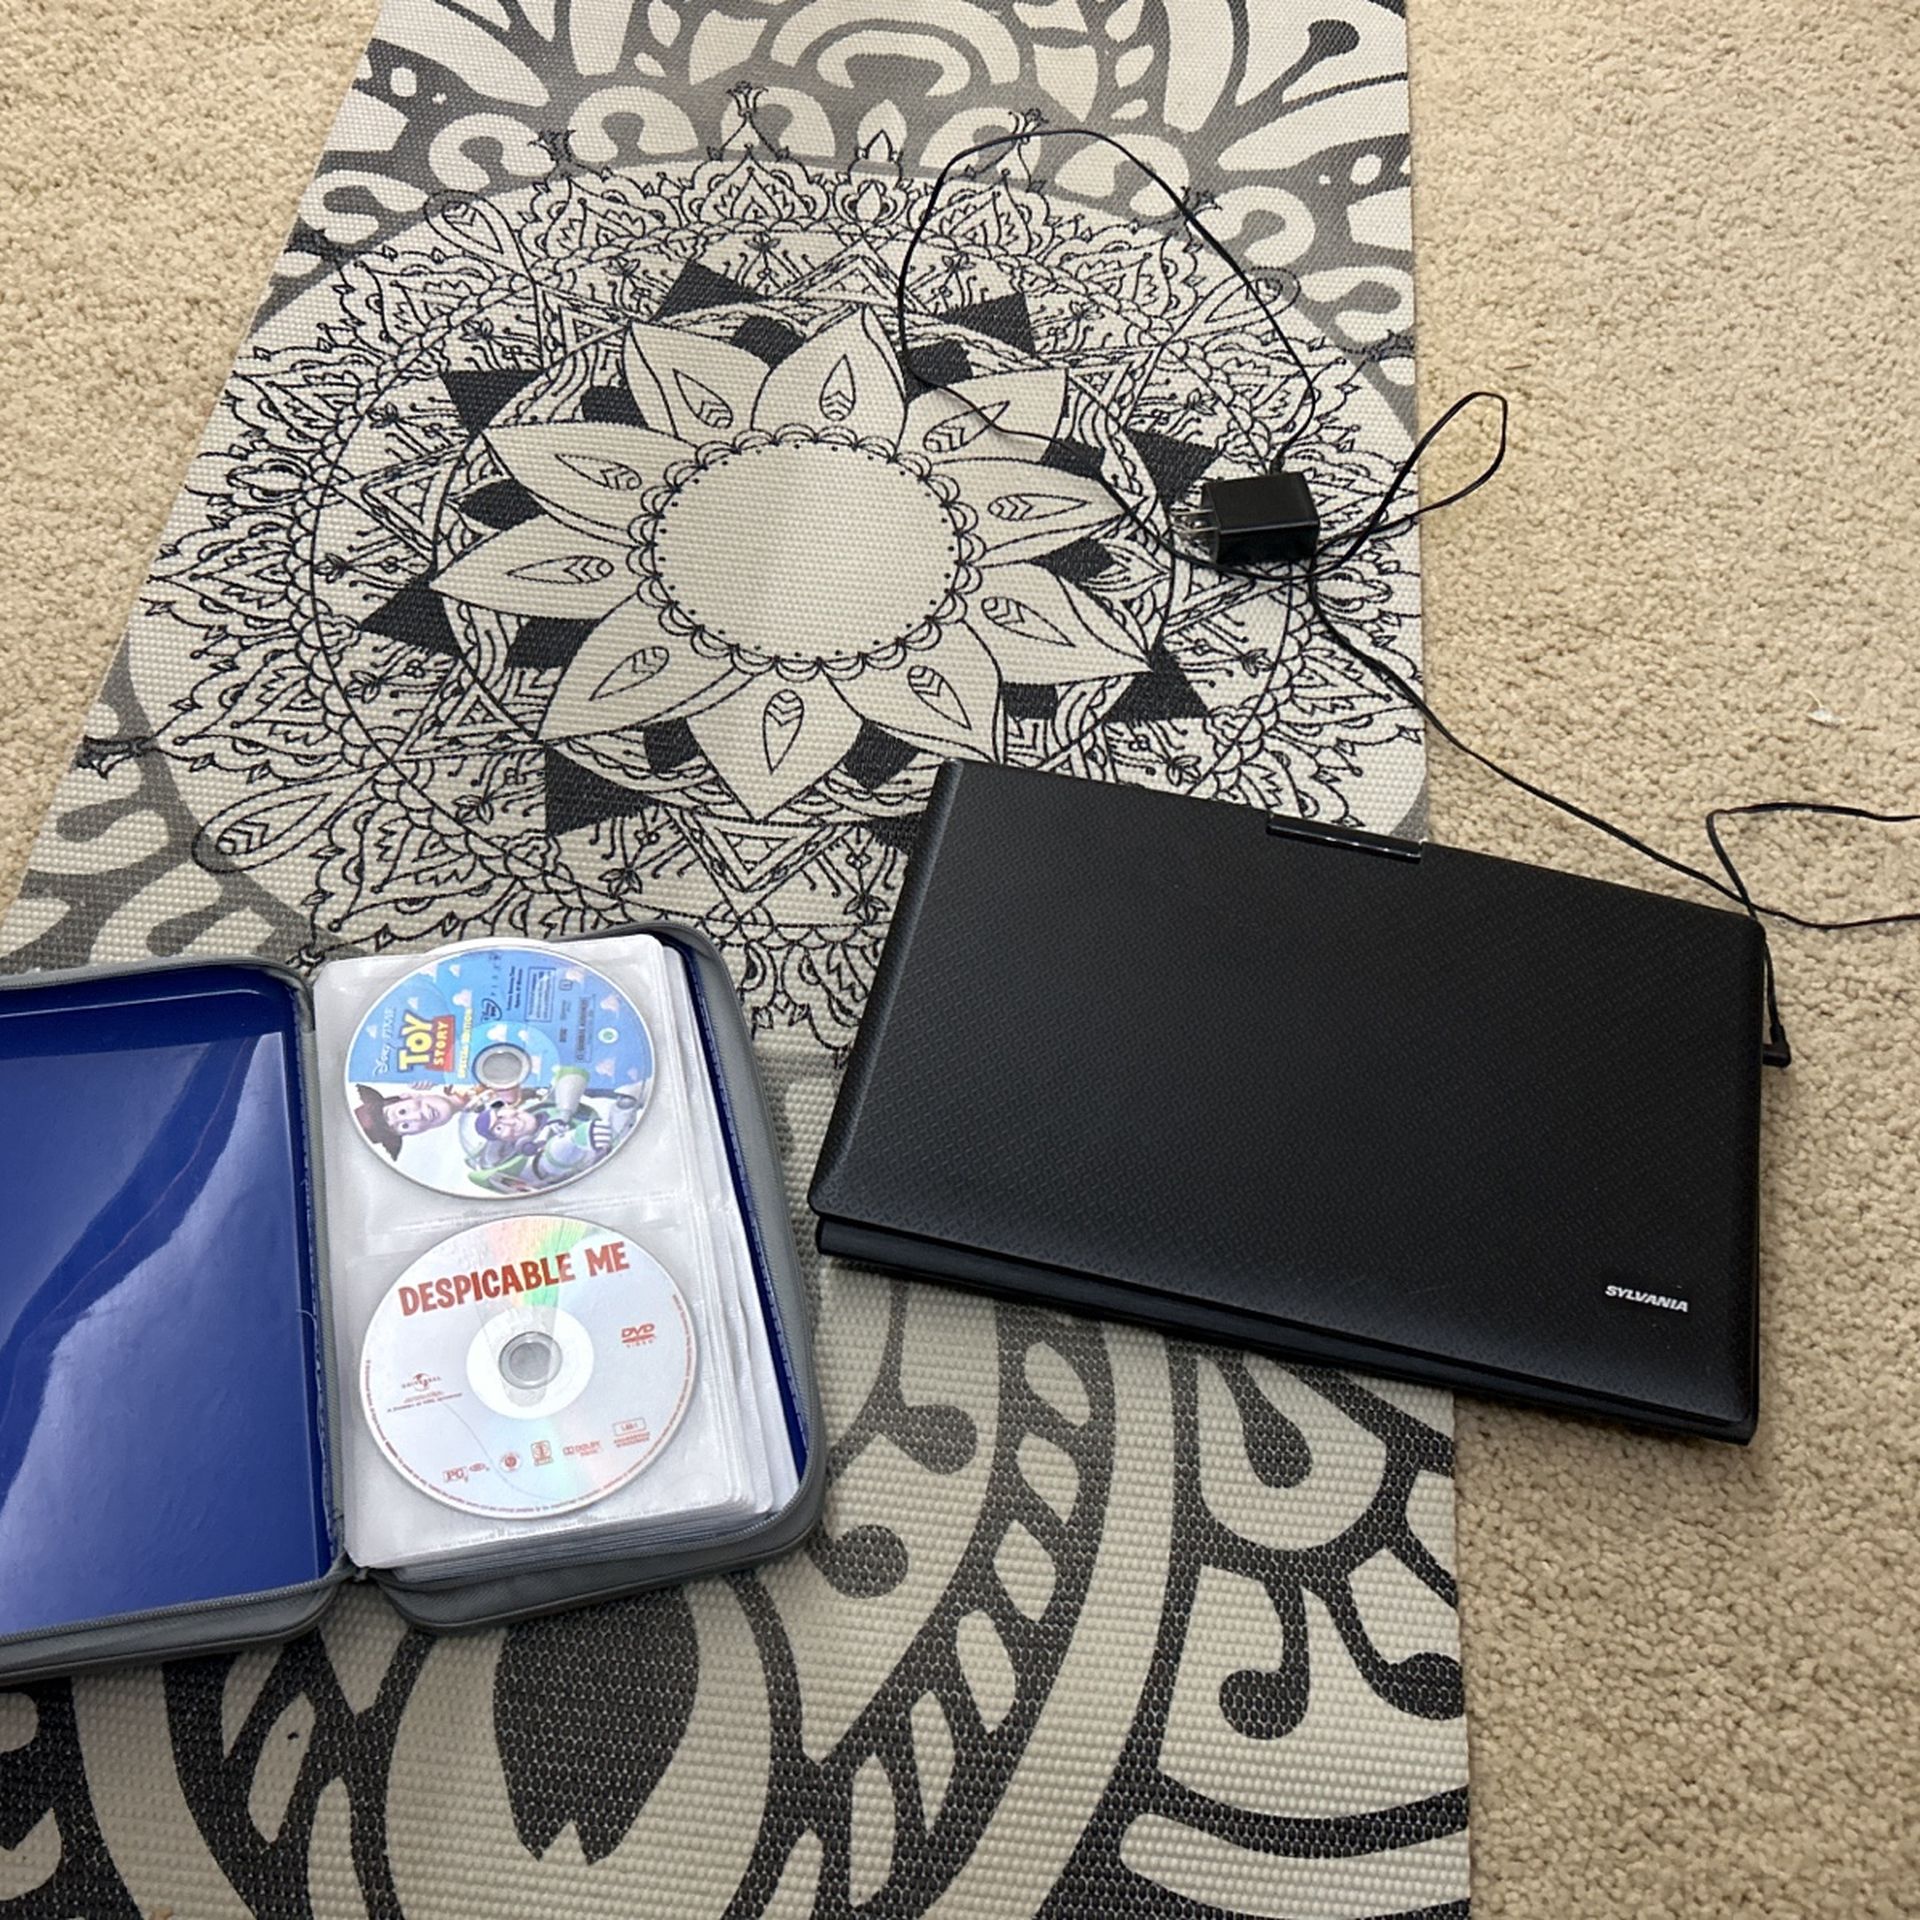 Portable DVD Player And 40 Movies!